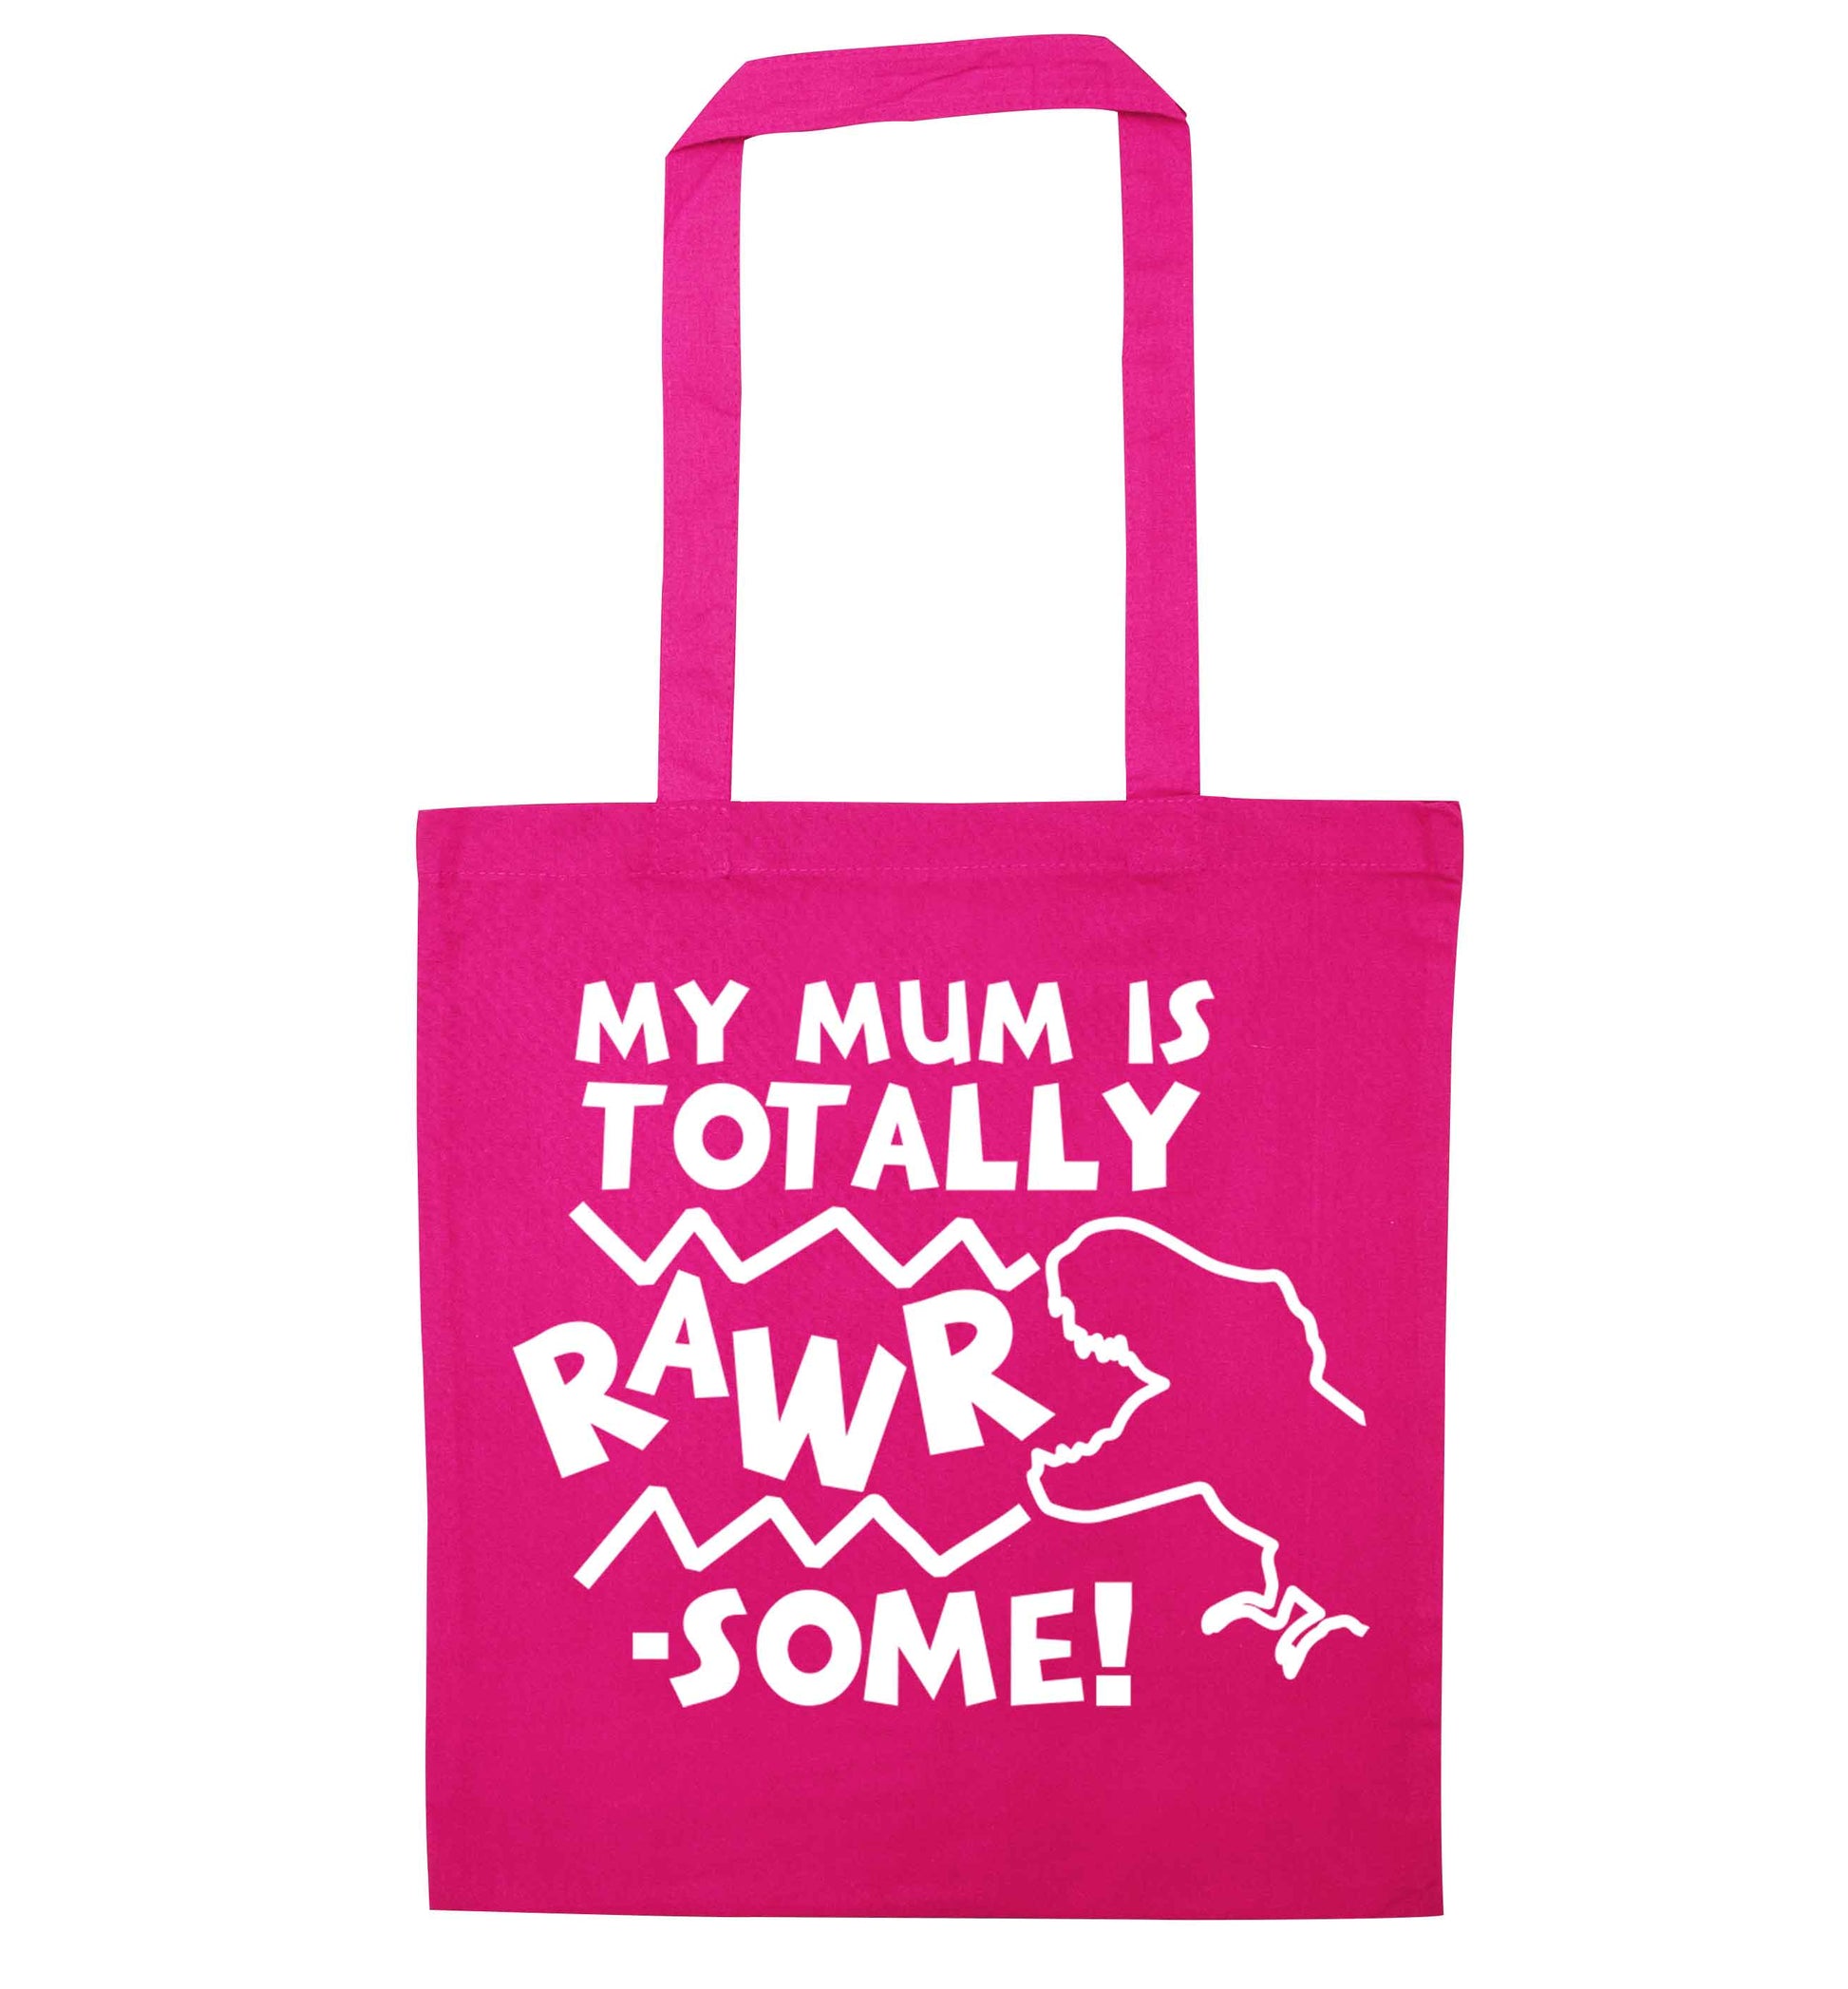 My mum is totally rawrsome pink tote bag